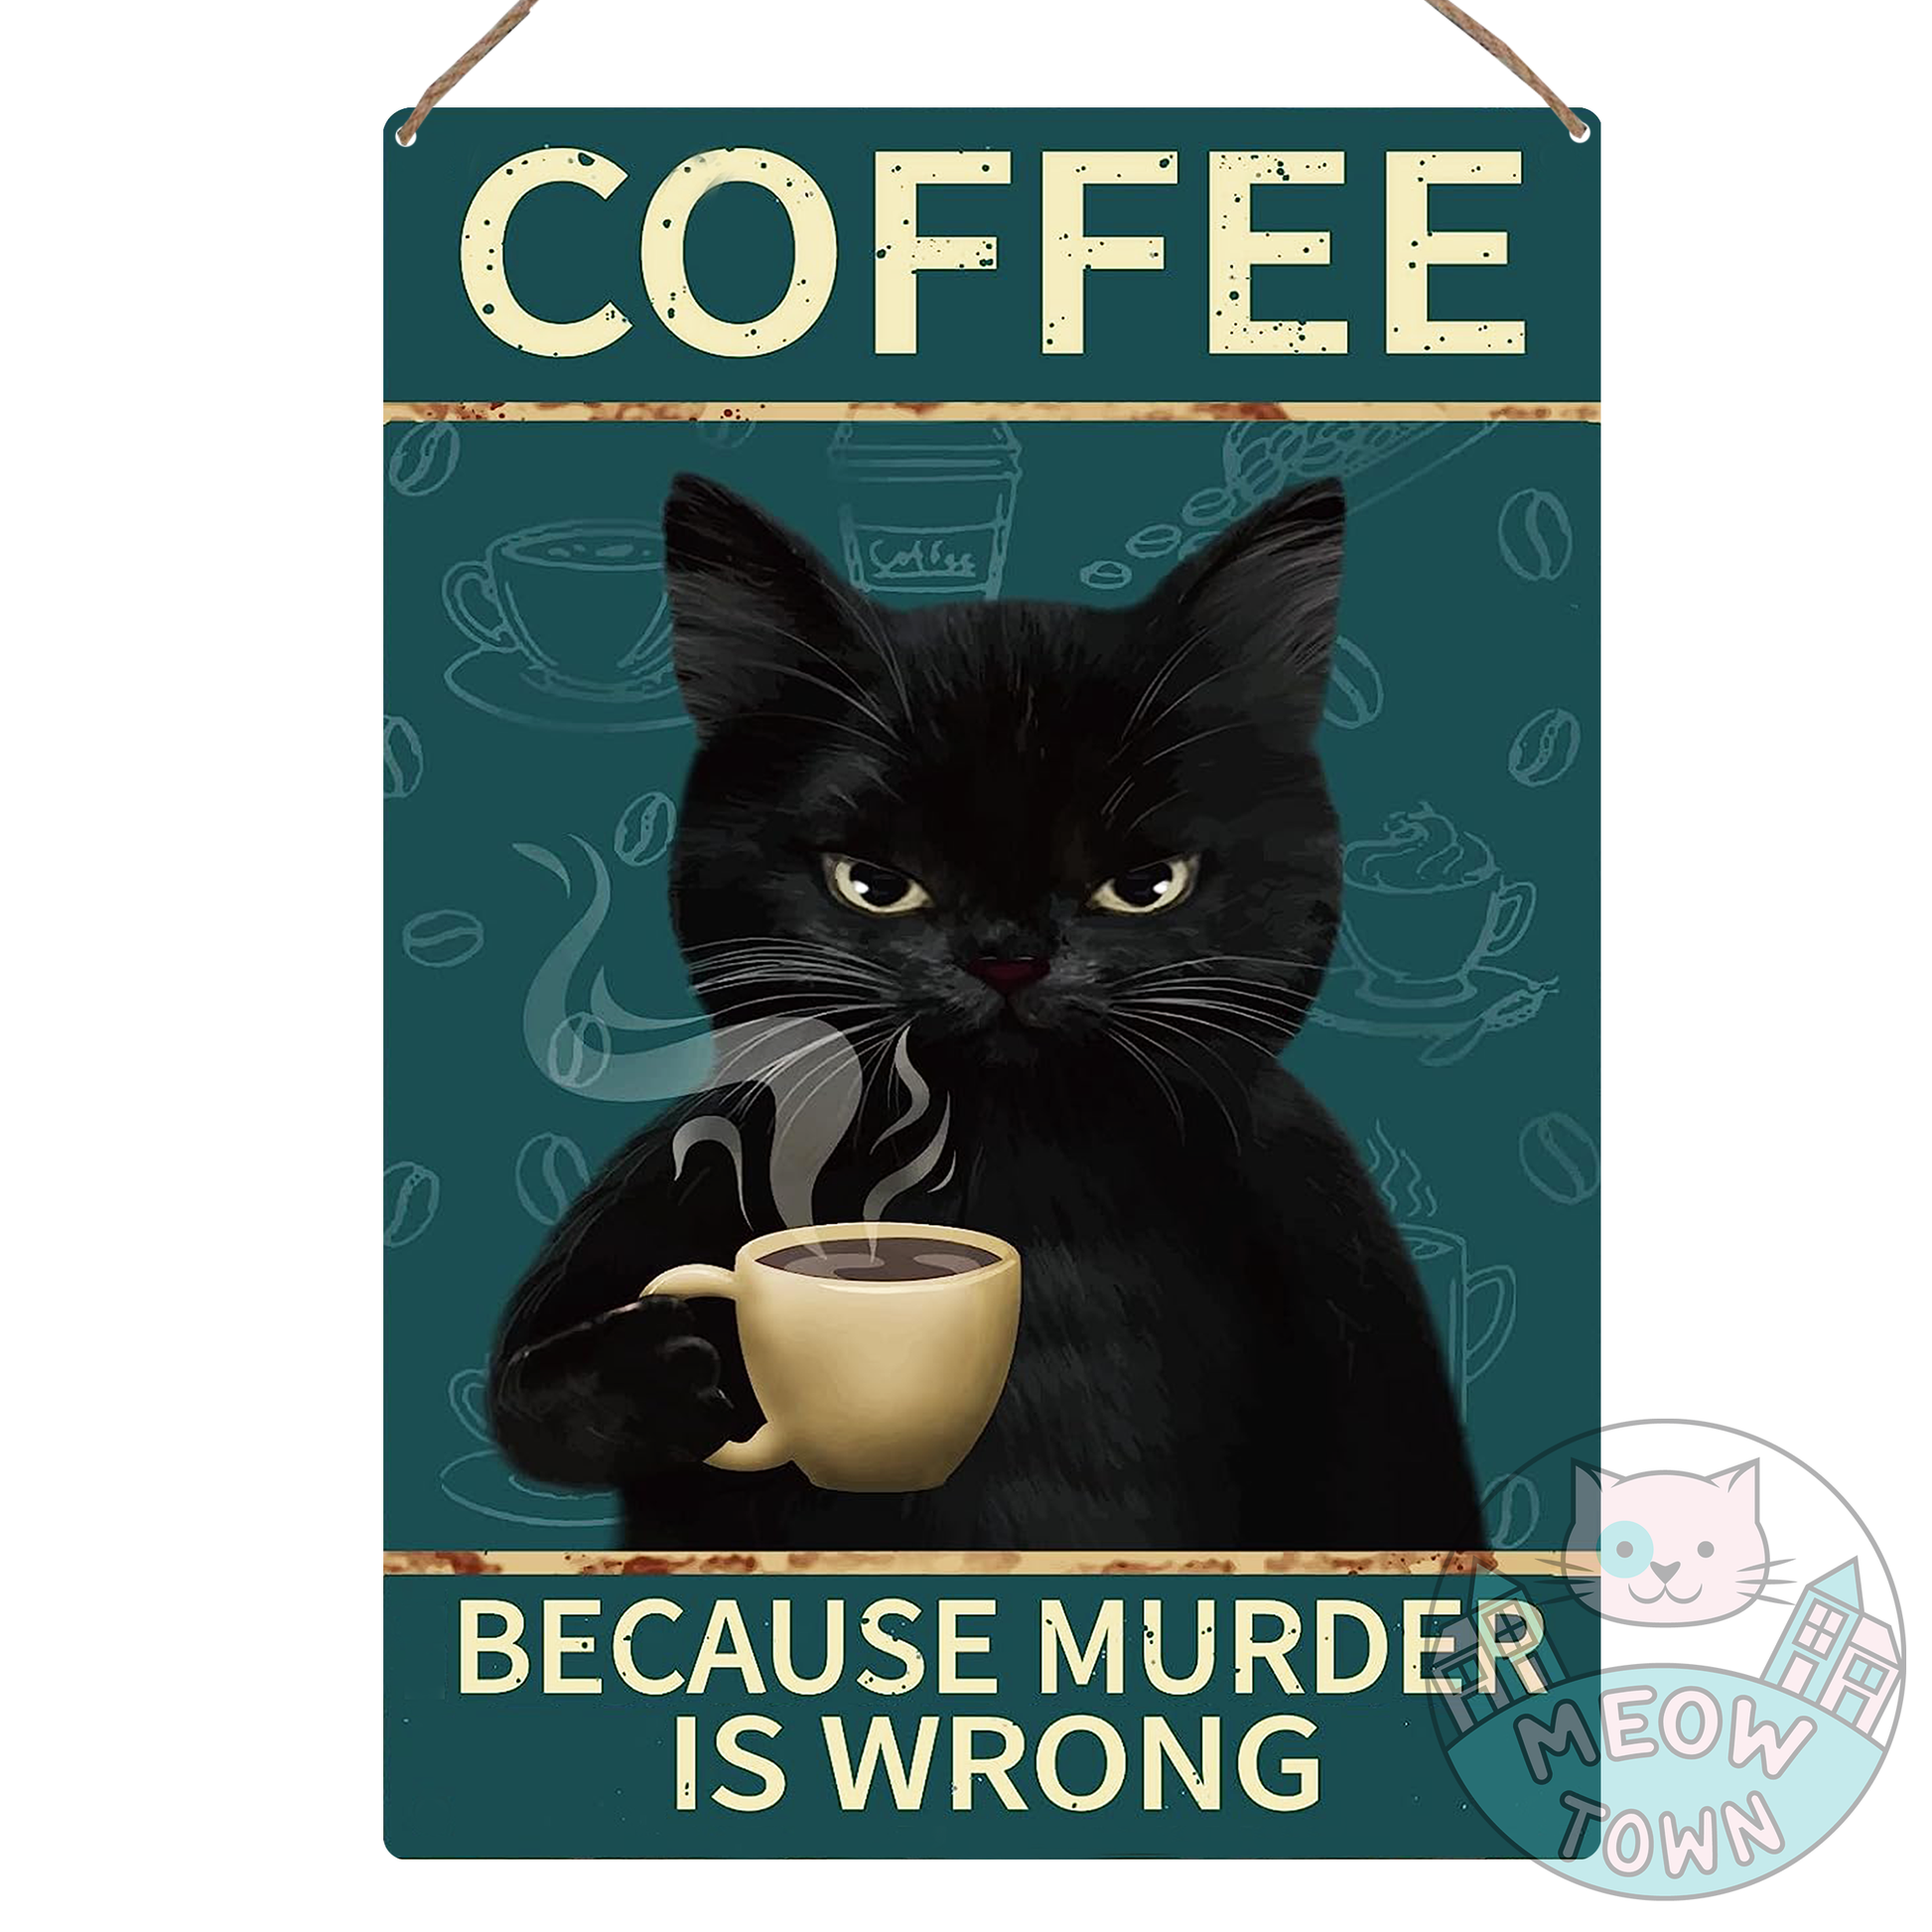 Funny metal wall sign with ‘Coffee because murder is wrong’ slogan to brighten your room or kitchen with :)  Aluminium material